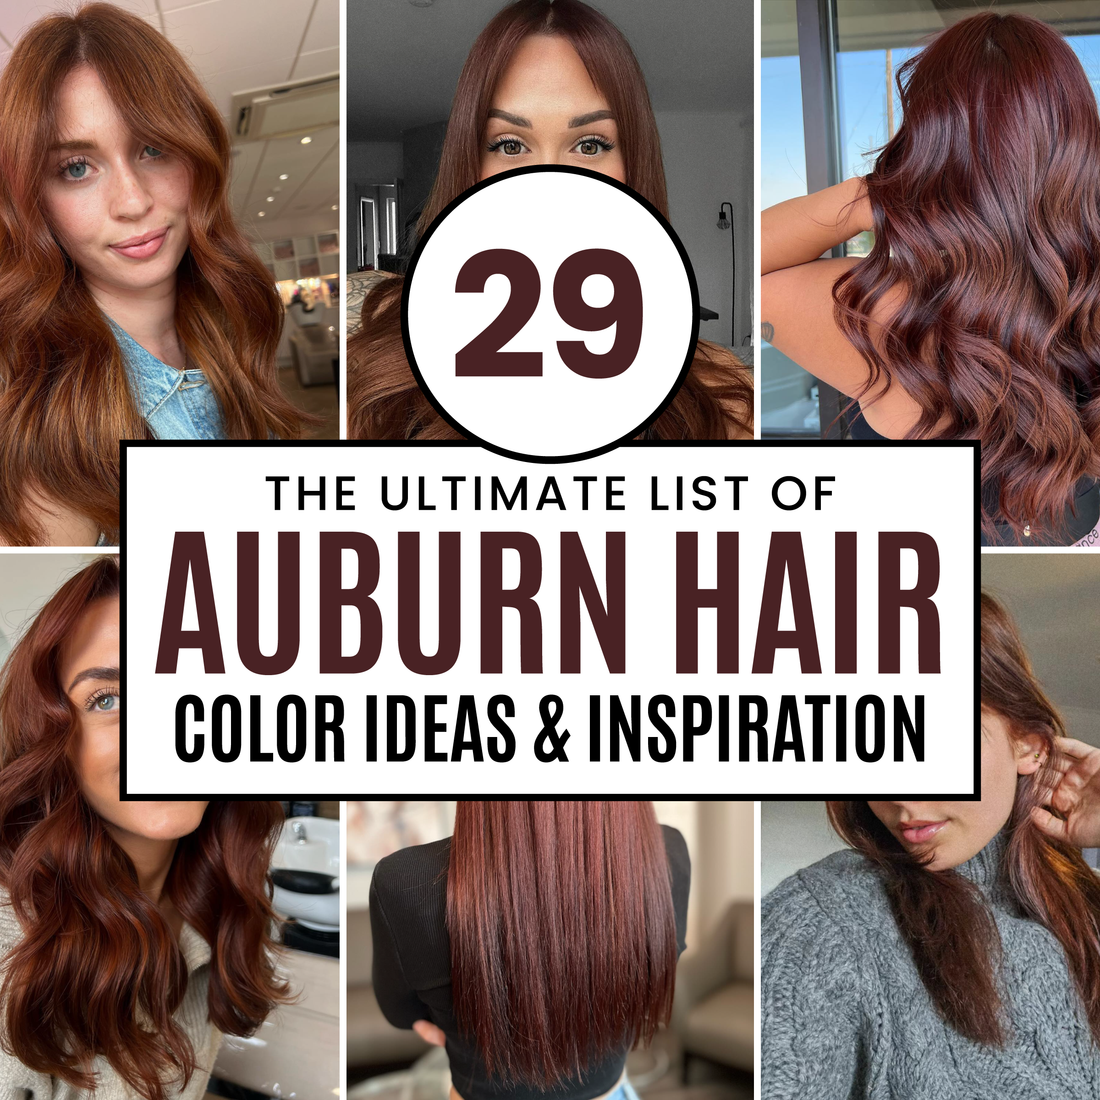 29 Auburn Hair Color Ideas for a Stunning Red-Shaded Look